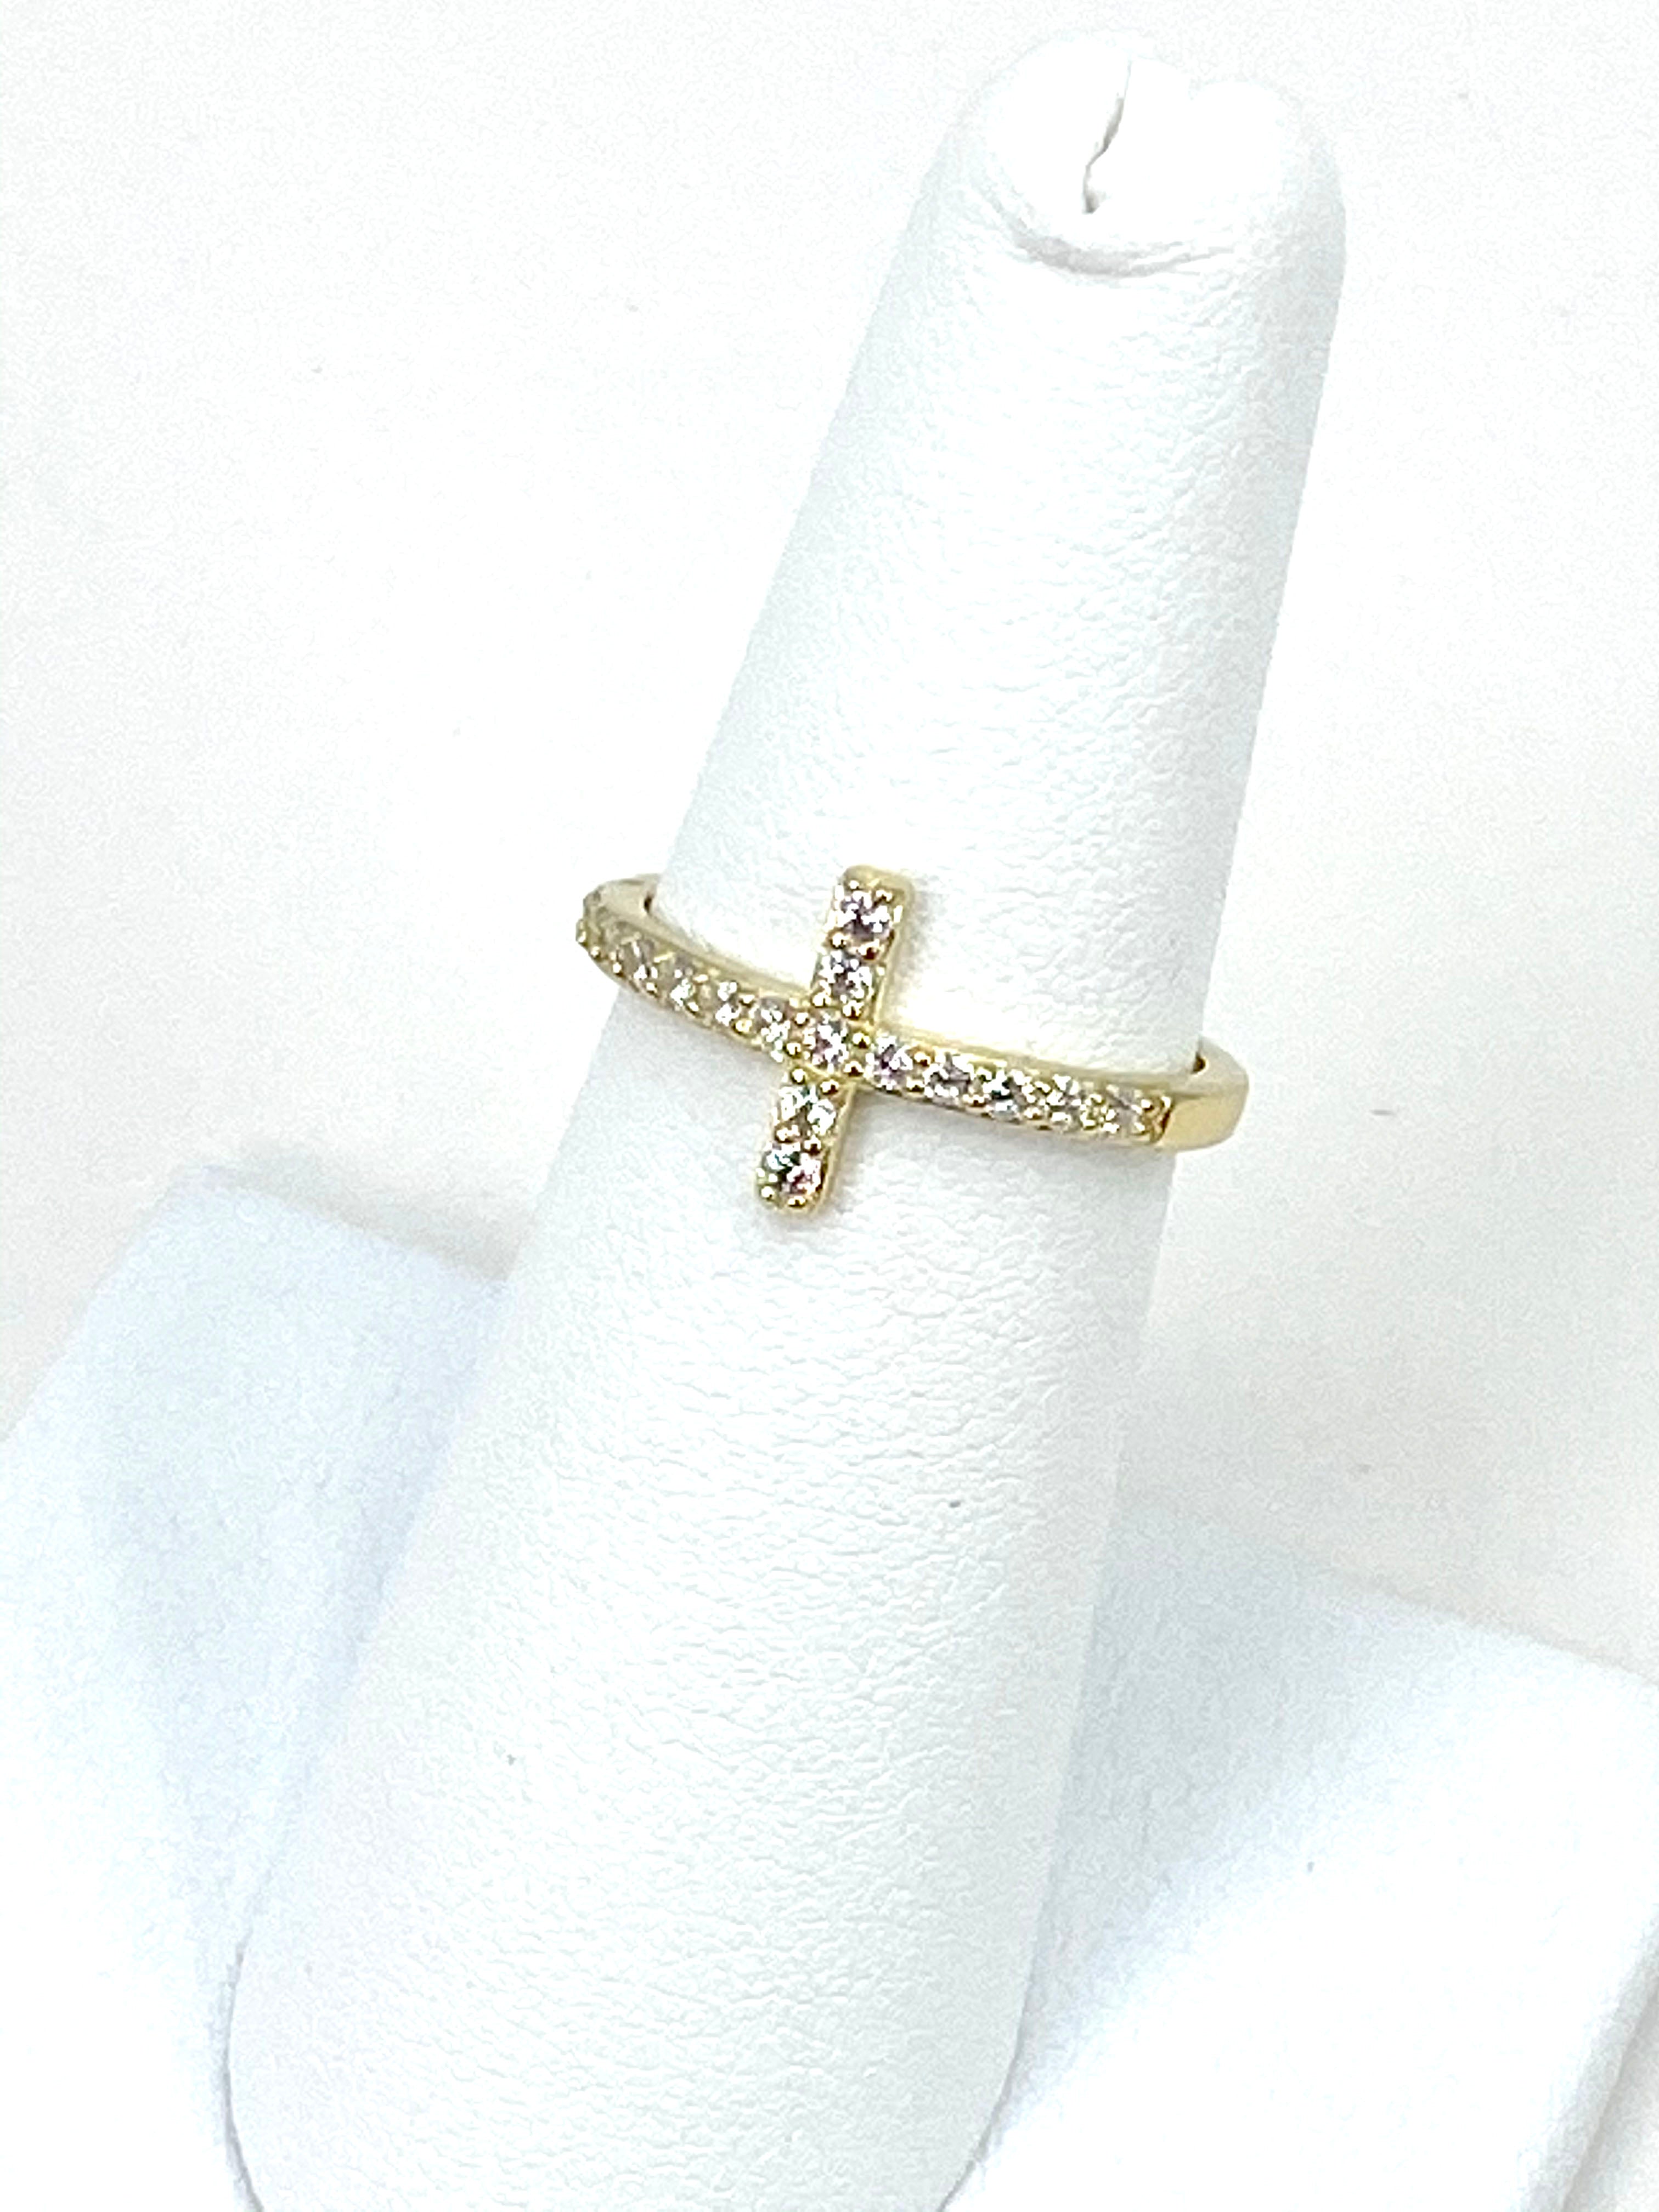 Cross Ring of Sterling Silver 925 Gold-Plated Beaded